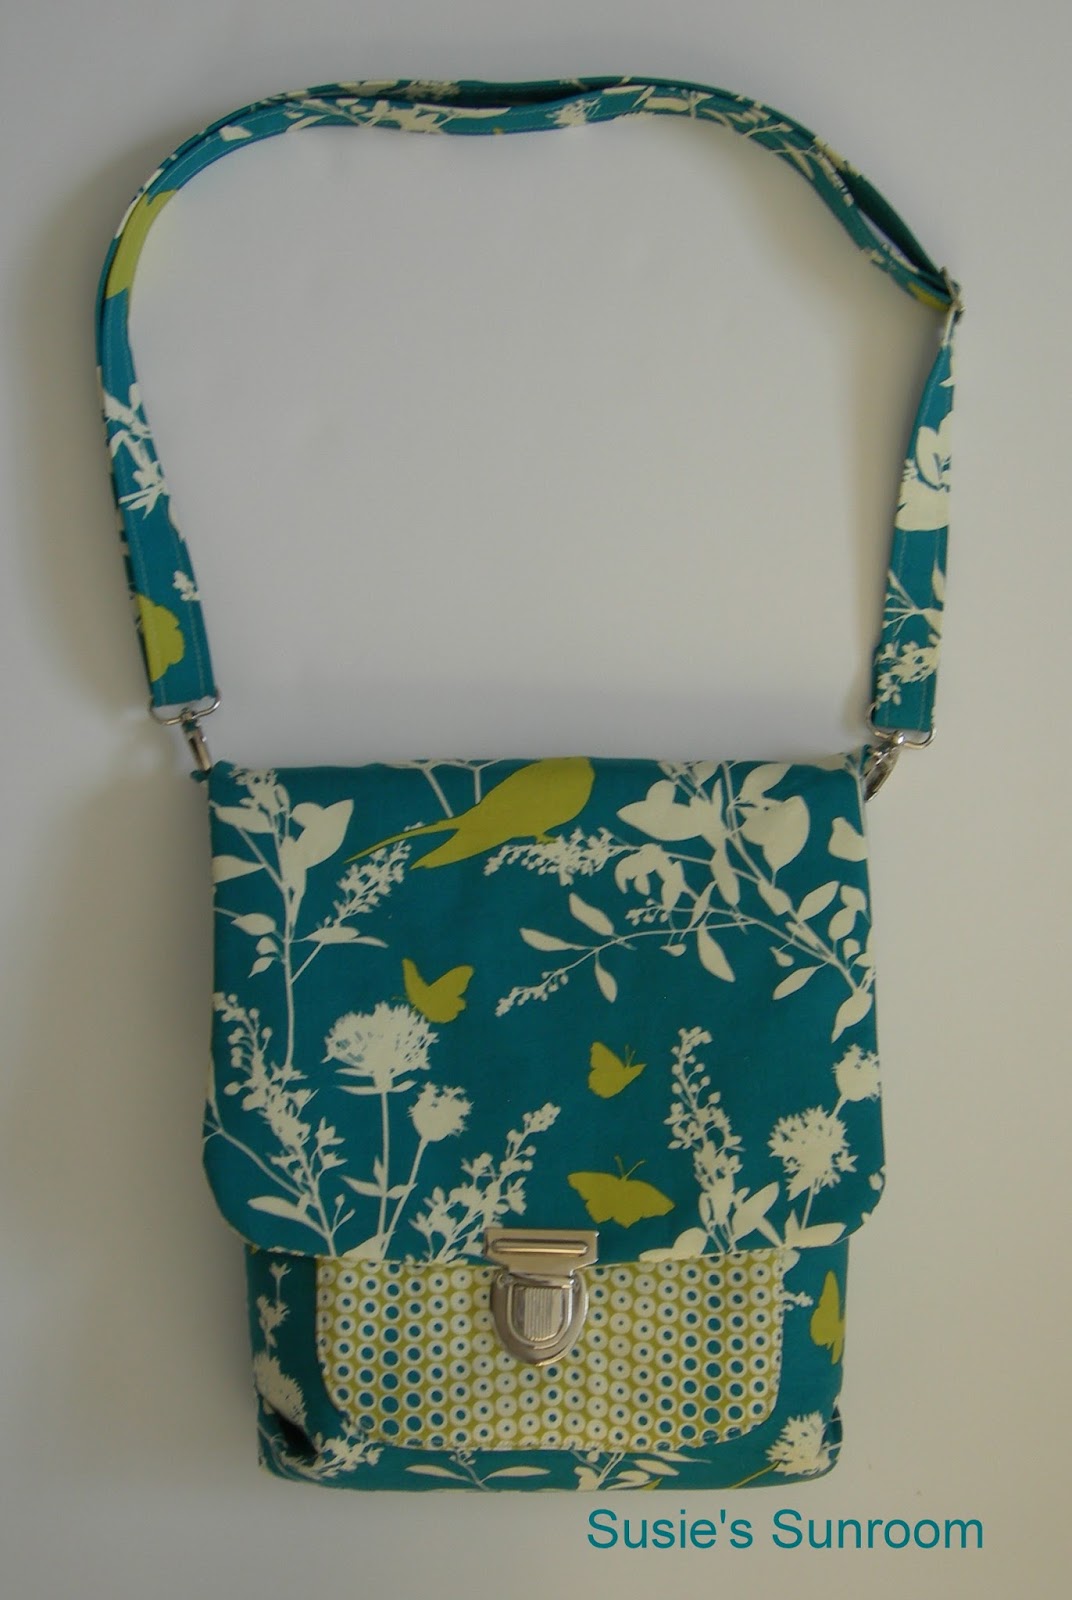 Susie's Sunroom: The Convertible Bag